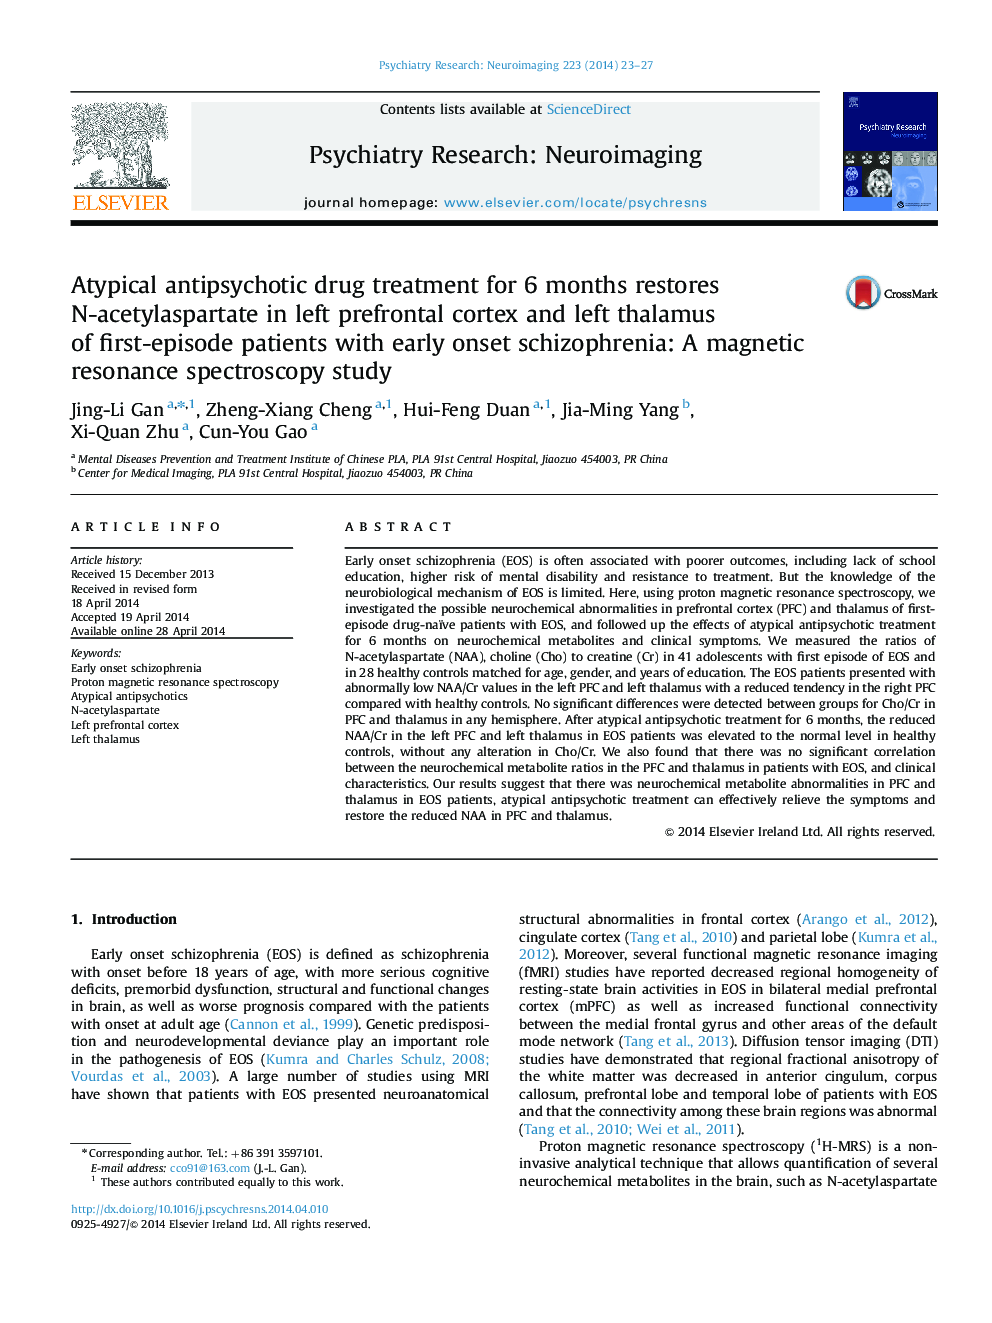 Atypical antipsychotic drug treatment for 6 months restores N-acetylaspartate in left prefrontal cortex and left thalamus of first-episode patients with early onset schizophrenia: A magnetic resonance spectroscopy study